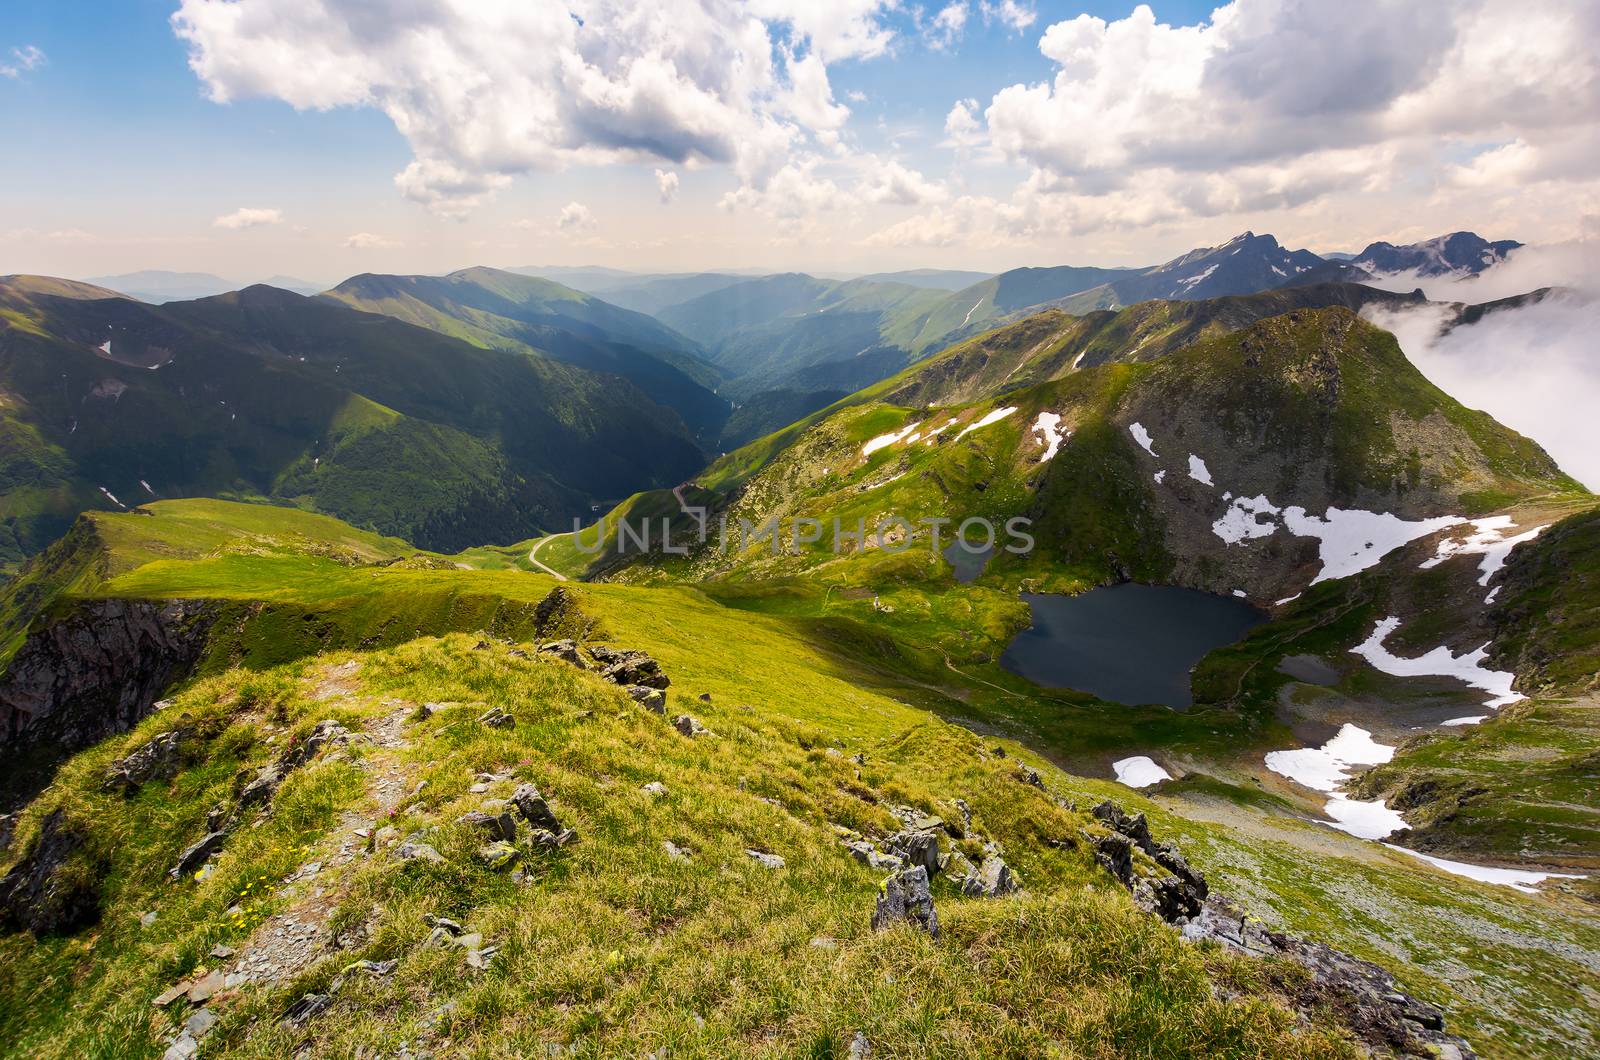 beautiful landscape of Romanian mountains. lovely summer scenery on a cloudy day. Lake Capra down the hillside